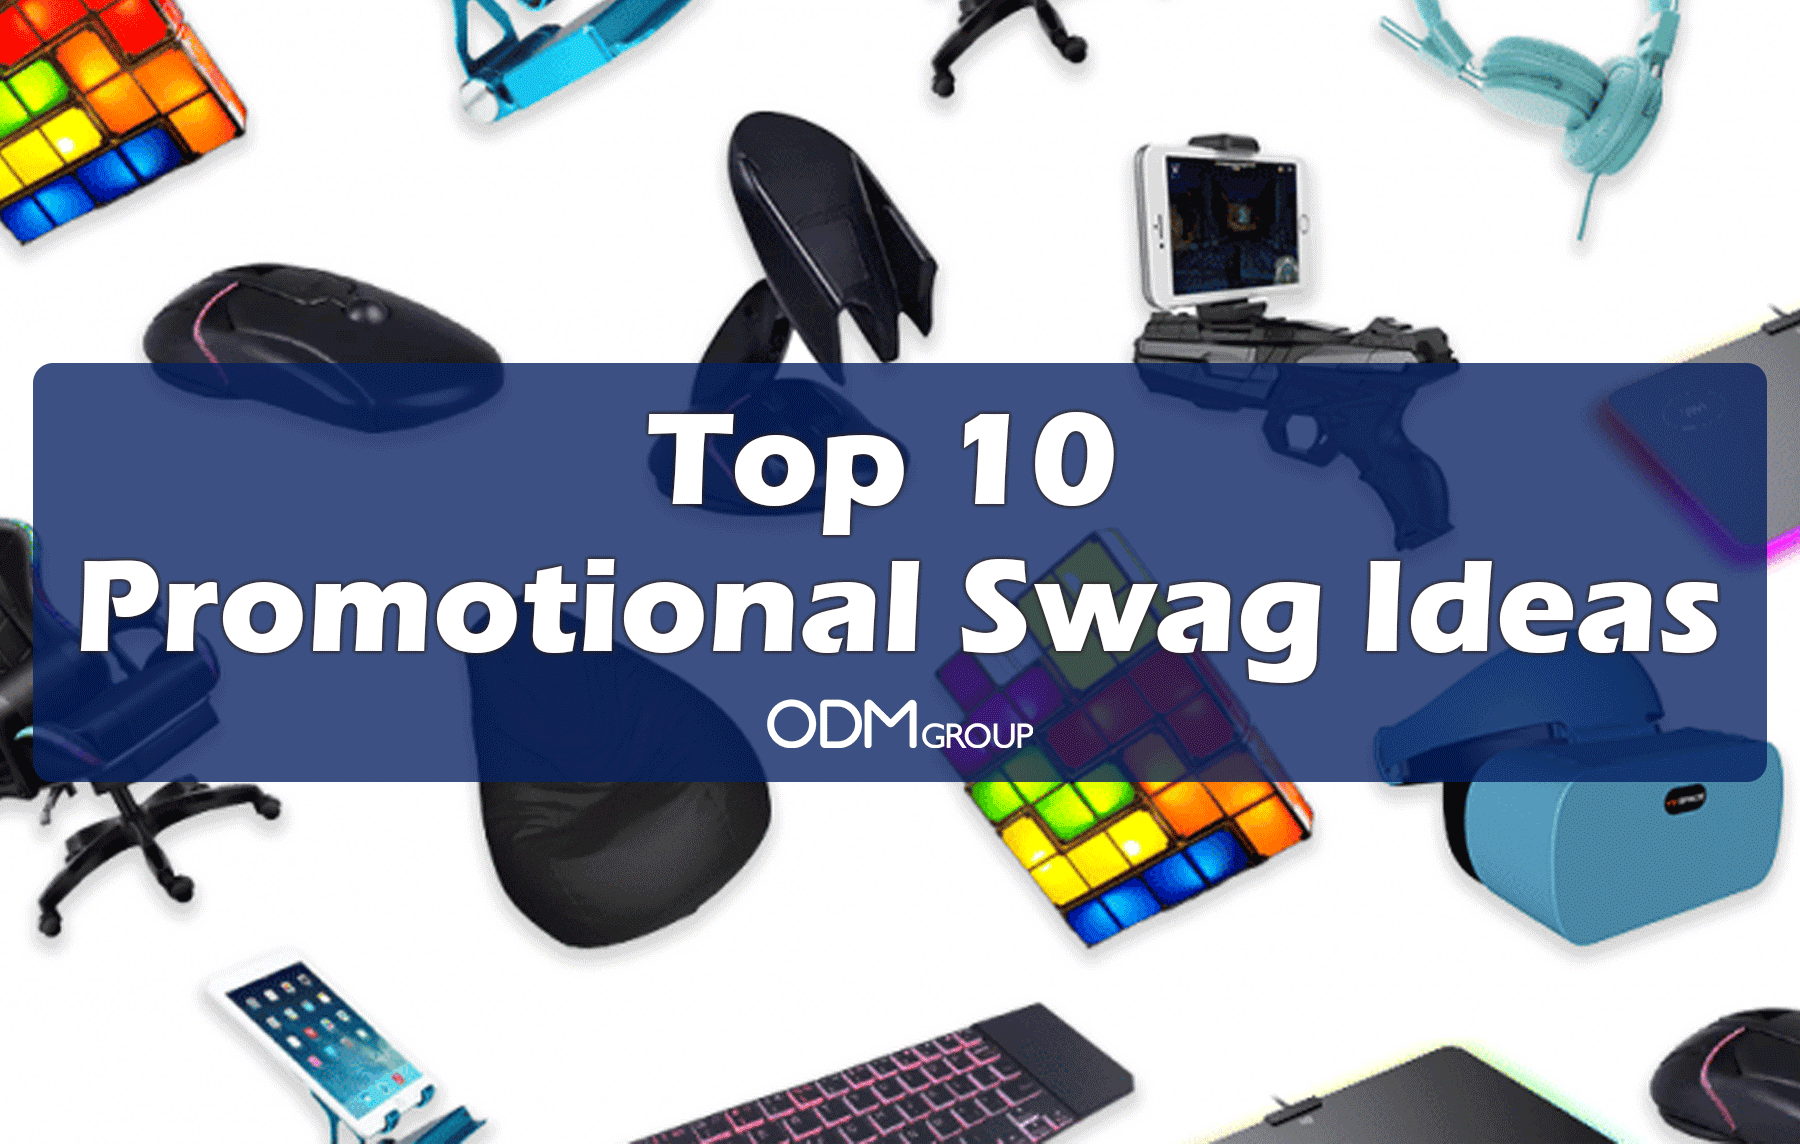 Top 10 Promotional Swag Ideas